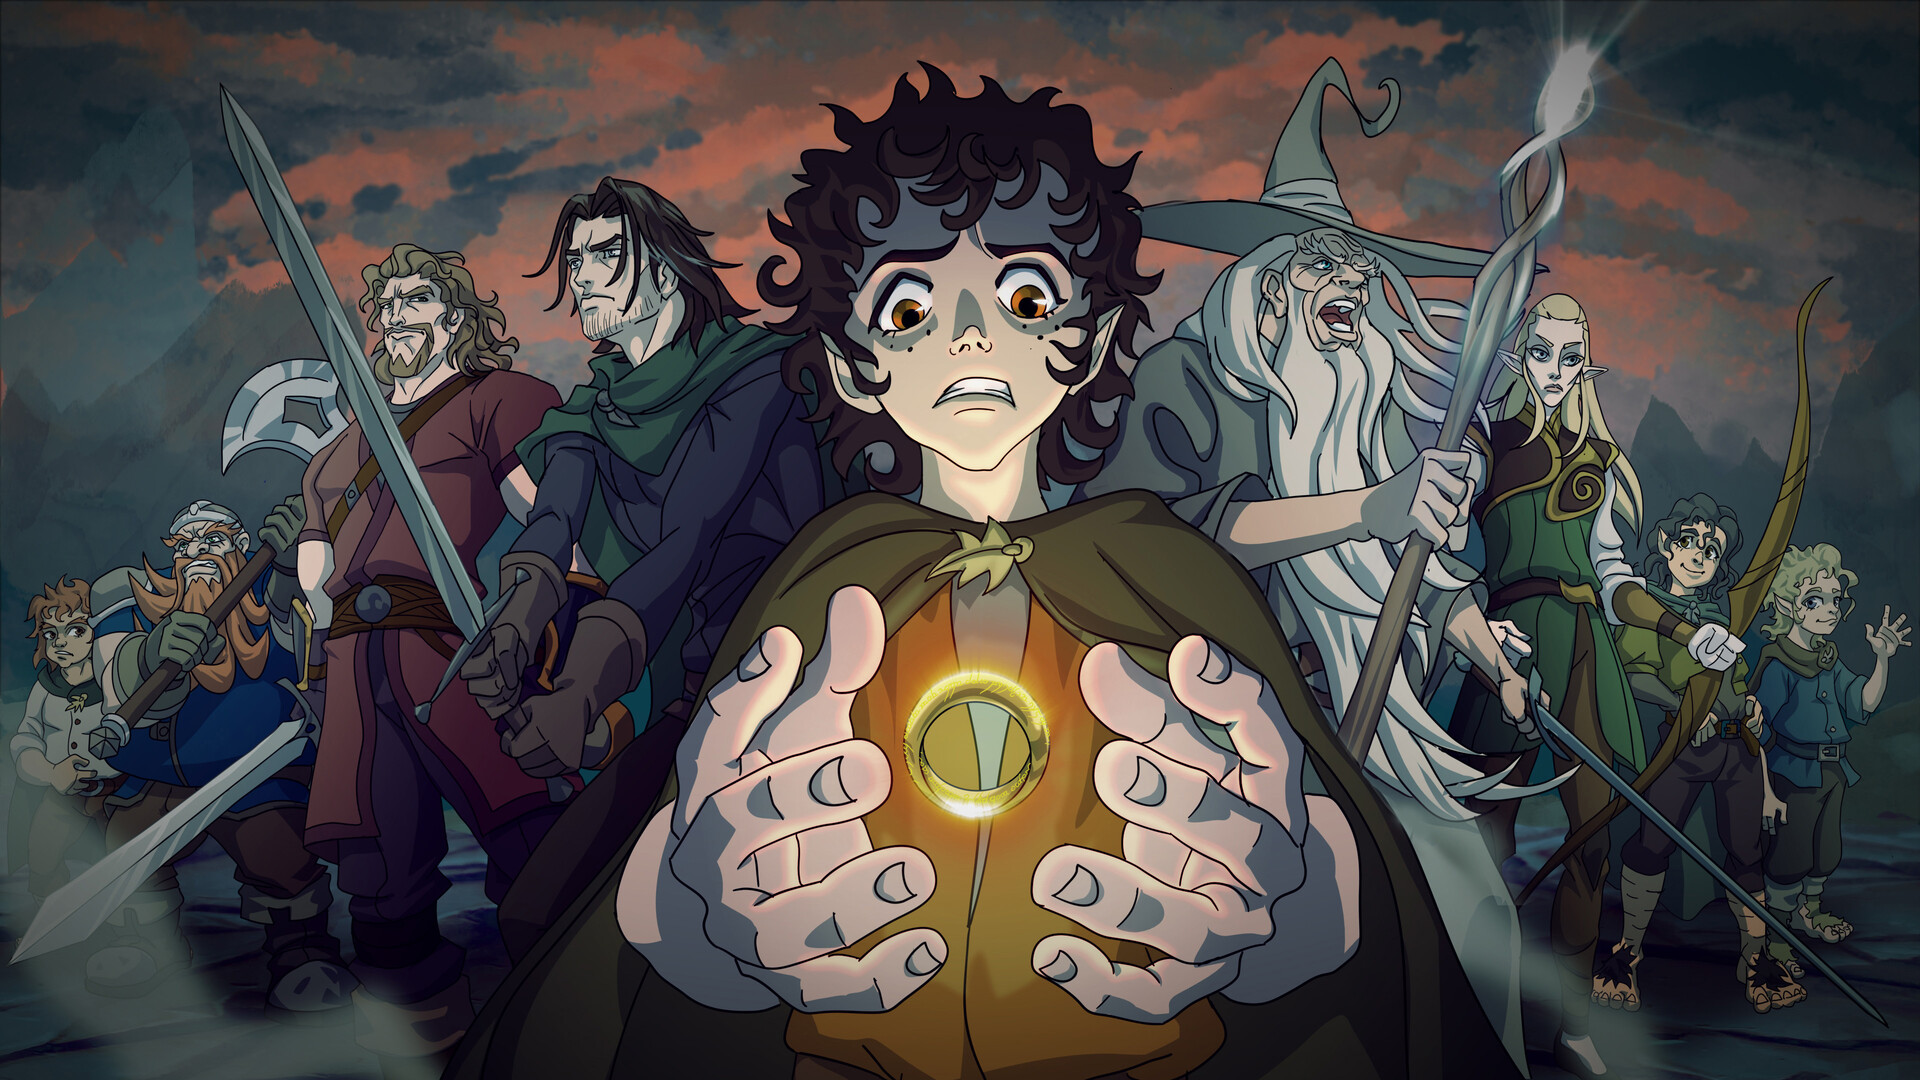 ArtStation - 2D Animated Lord of the Rings : The Fellowship of the Ring